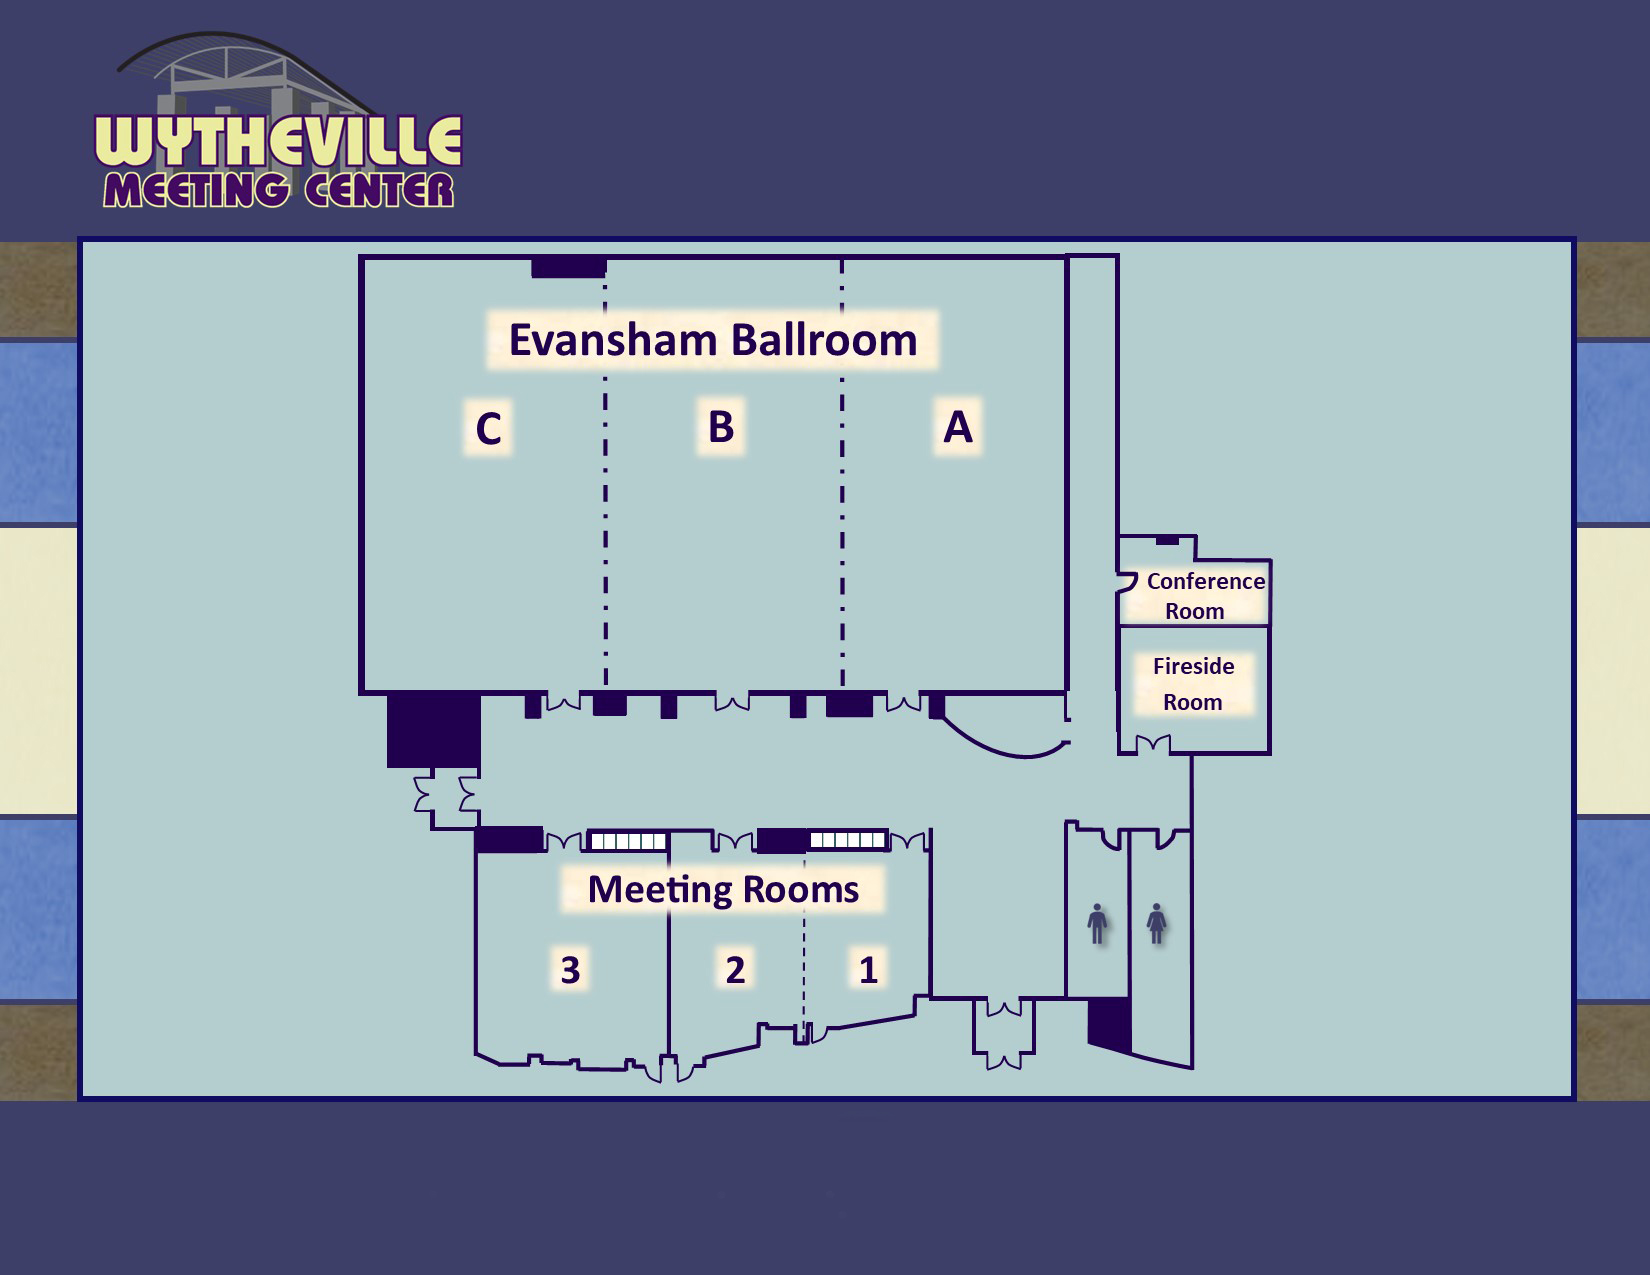 Wytheville Meeting Center Layout